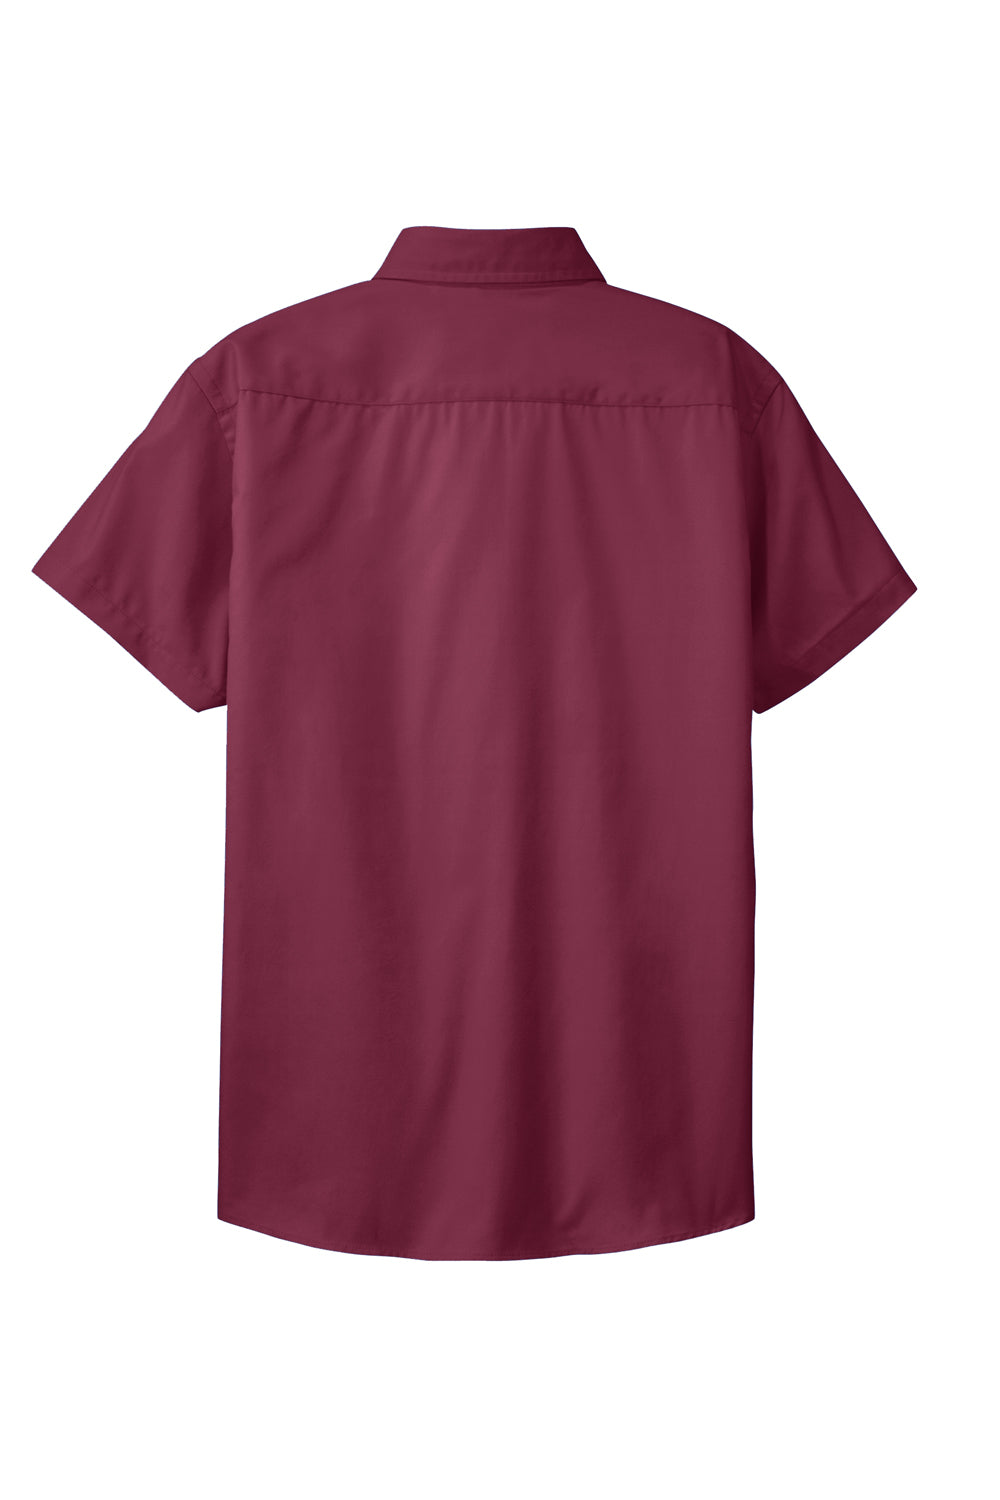 Port Authority L508 Womens Easy Care Wrinkle Resistant Short Sleeve Button Down Shirt Burgundy Flat Back